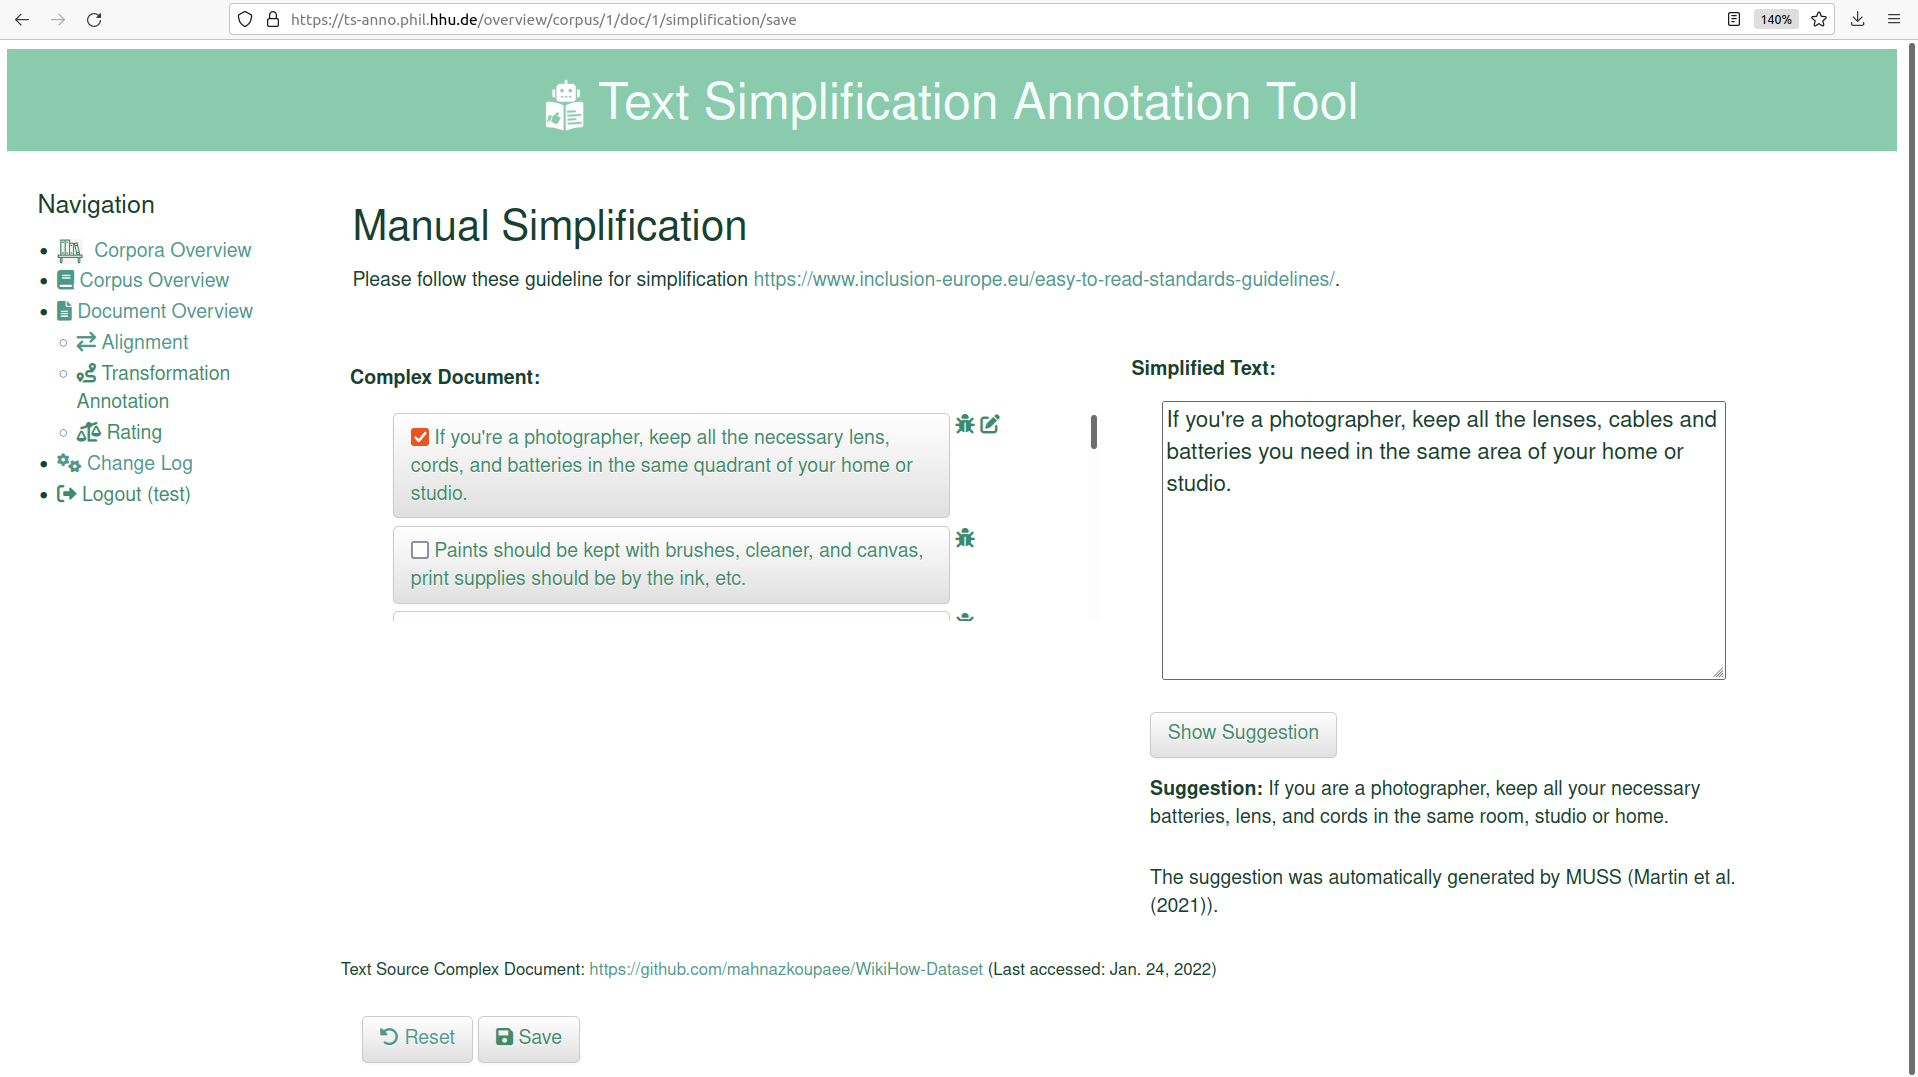 Screenshot of Manual Simplification in TS-ANNO